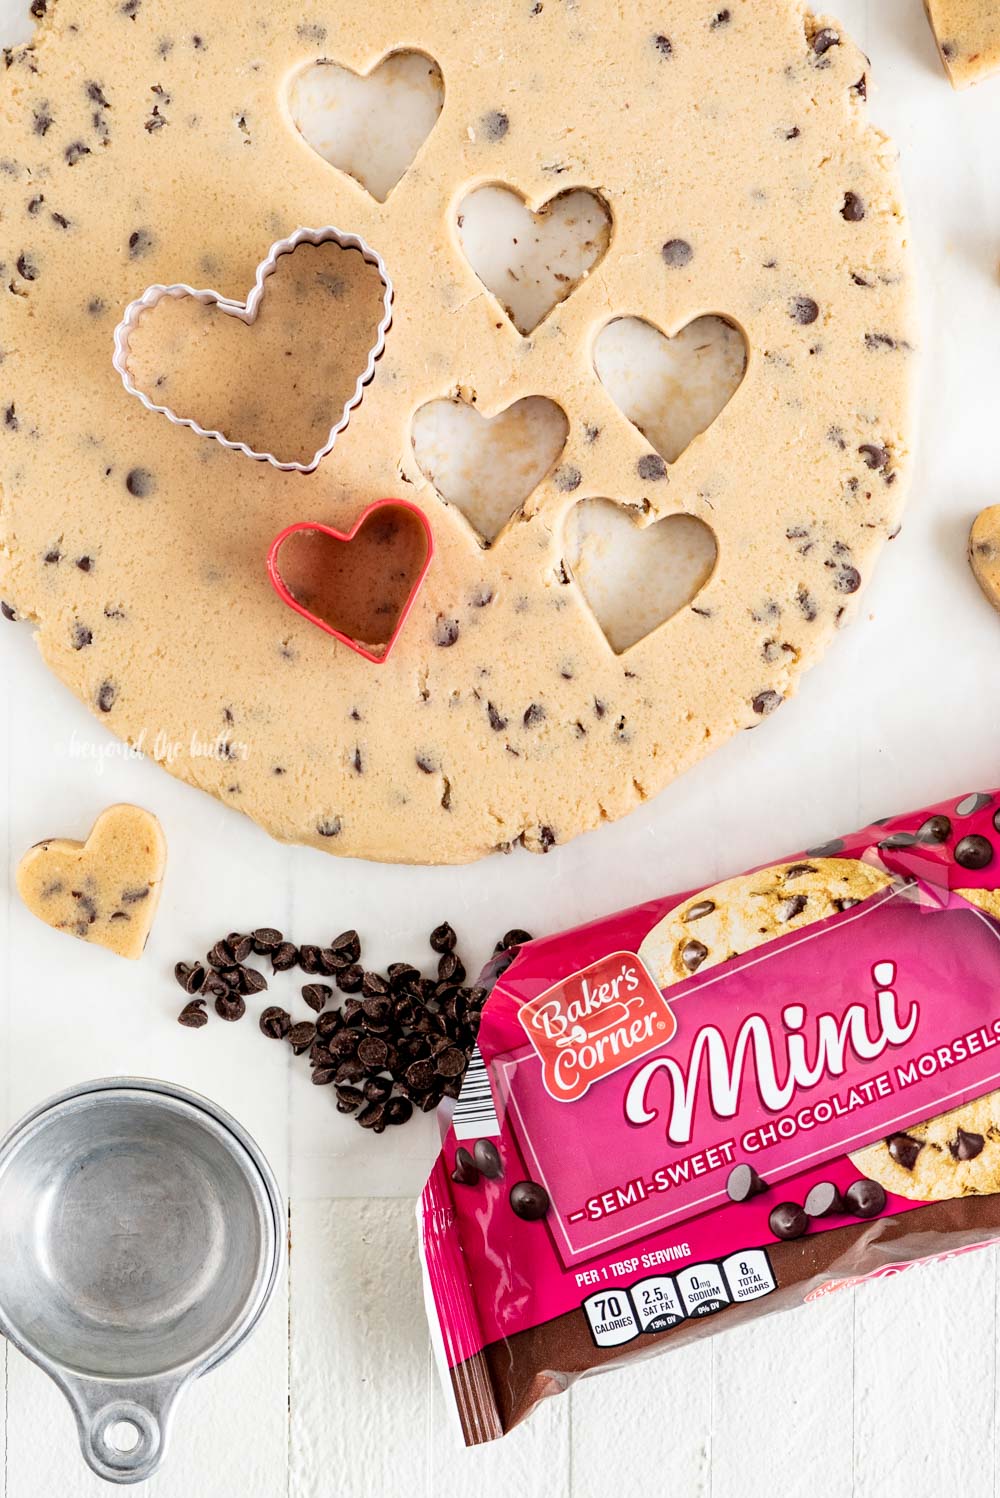 Cutting out cookie dough hearts | All Images © Beyond the Butter, LLC